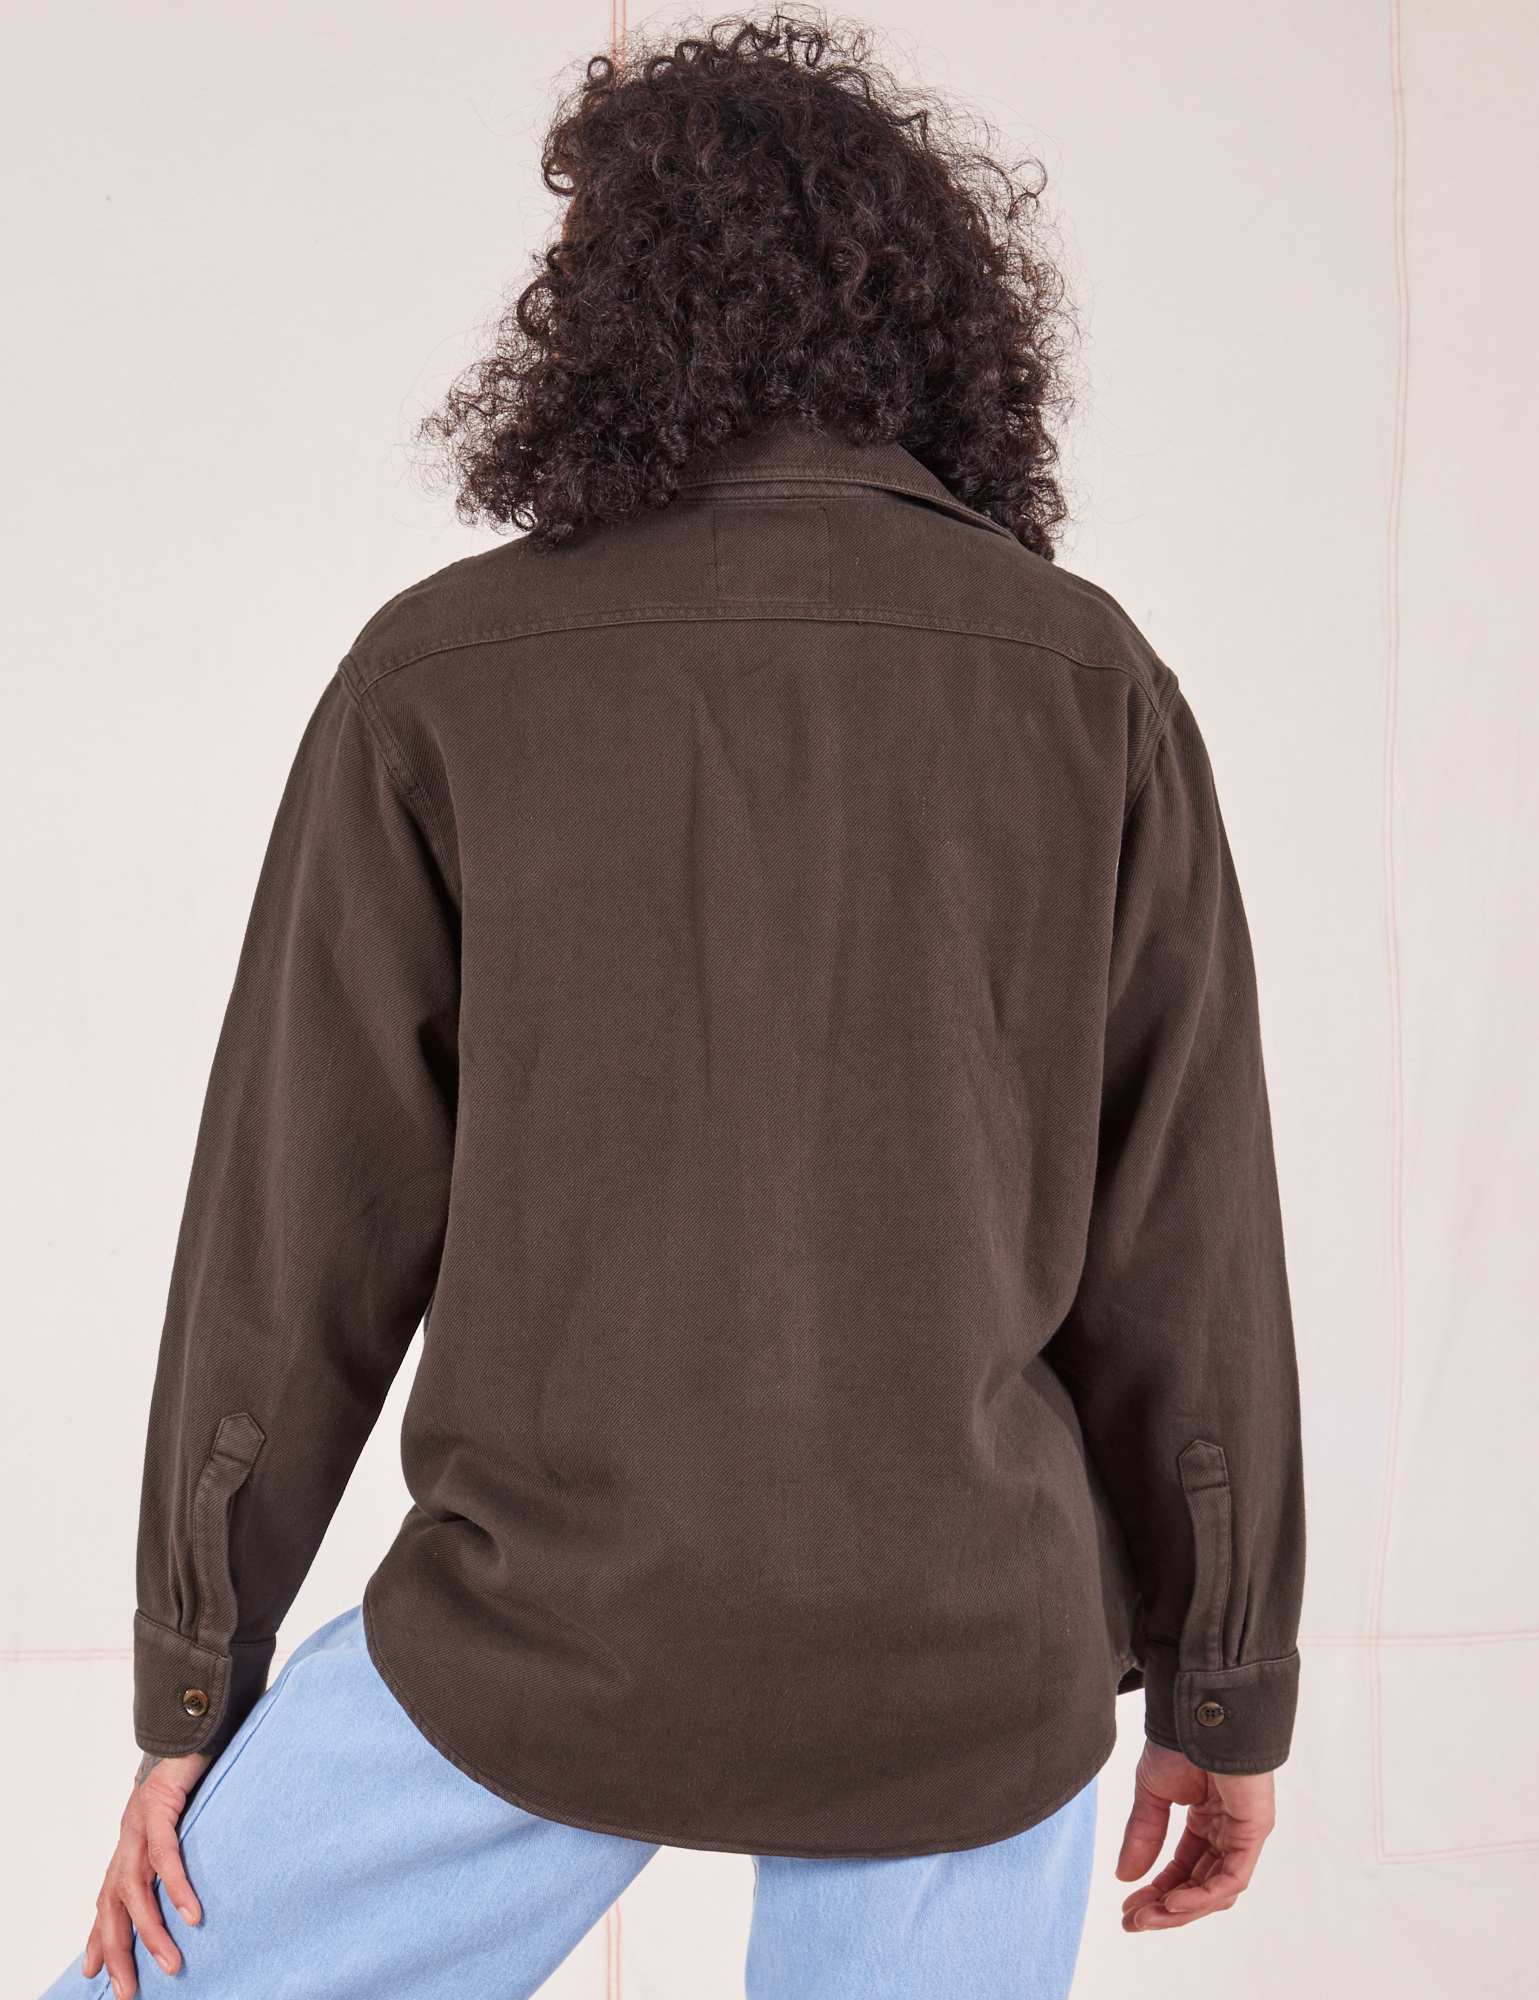 Back view of Flannel Overshirt in Espresso Brown on Jesse